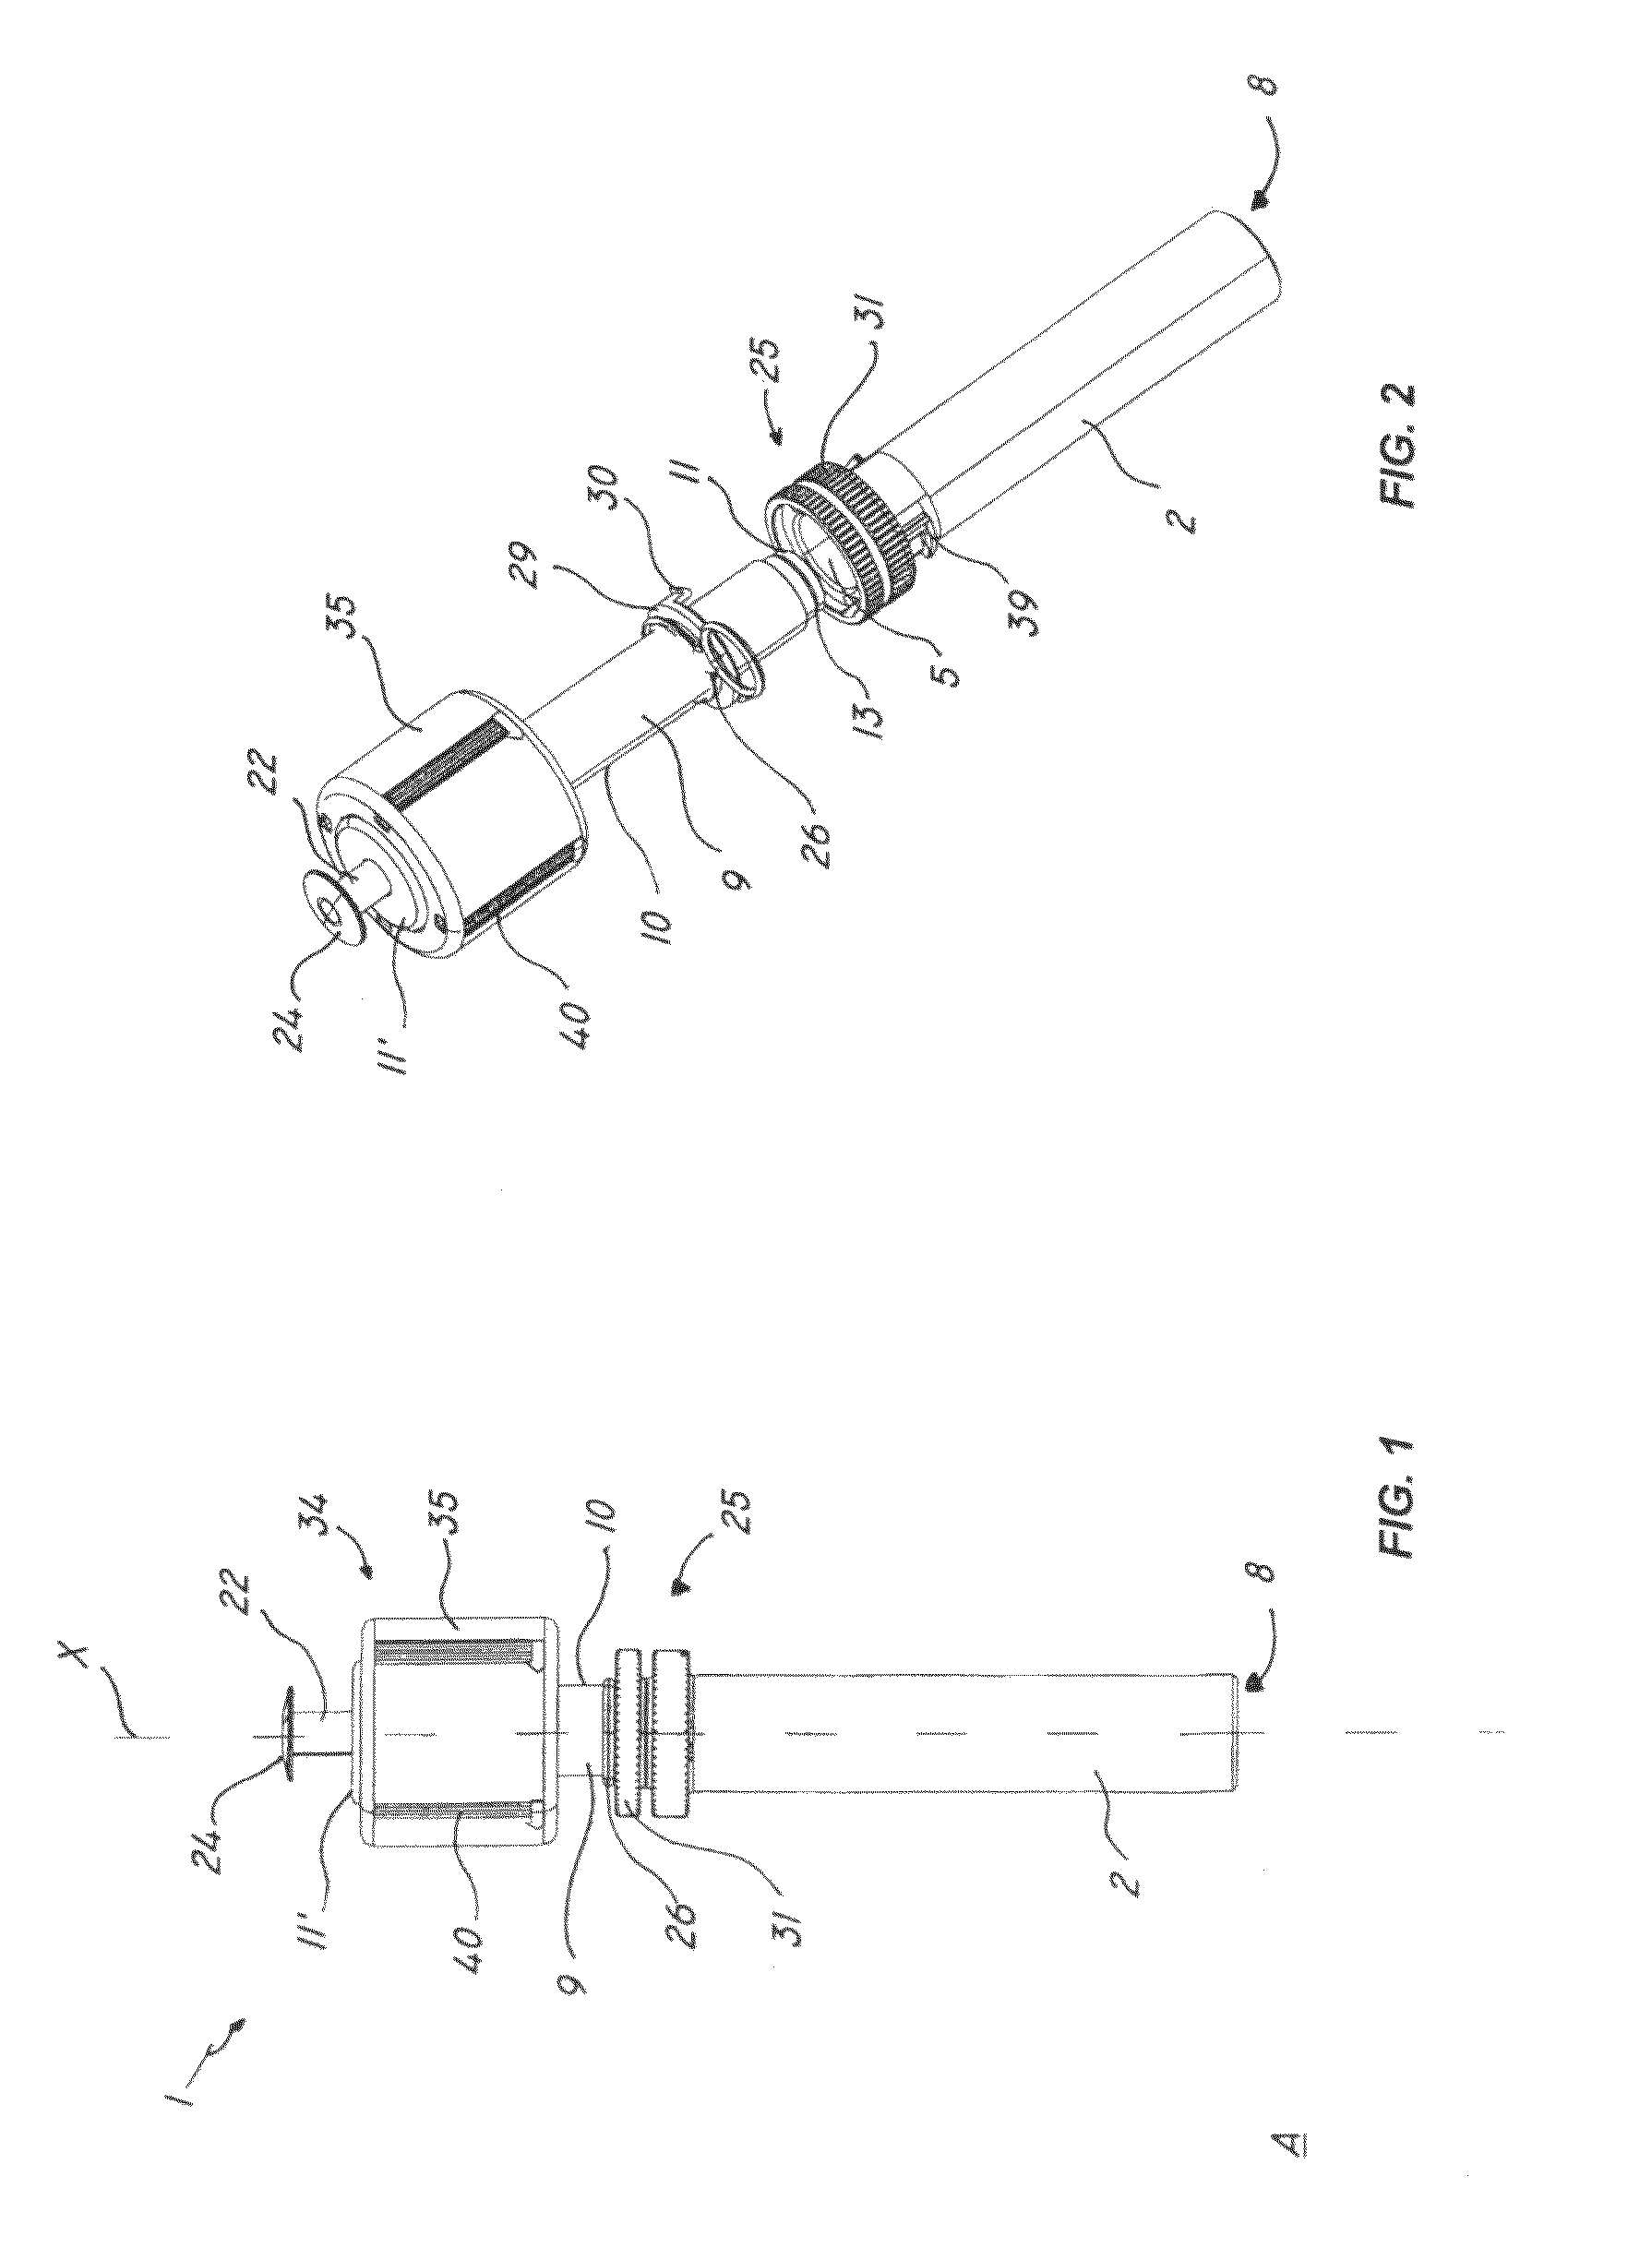 Cartridge for storage and delivery of a two-phase compound